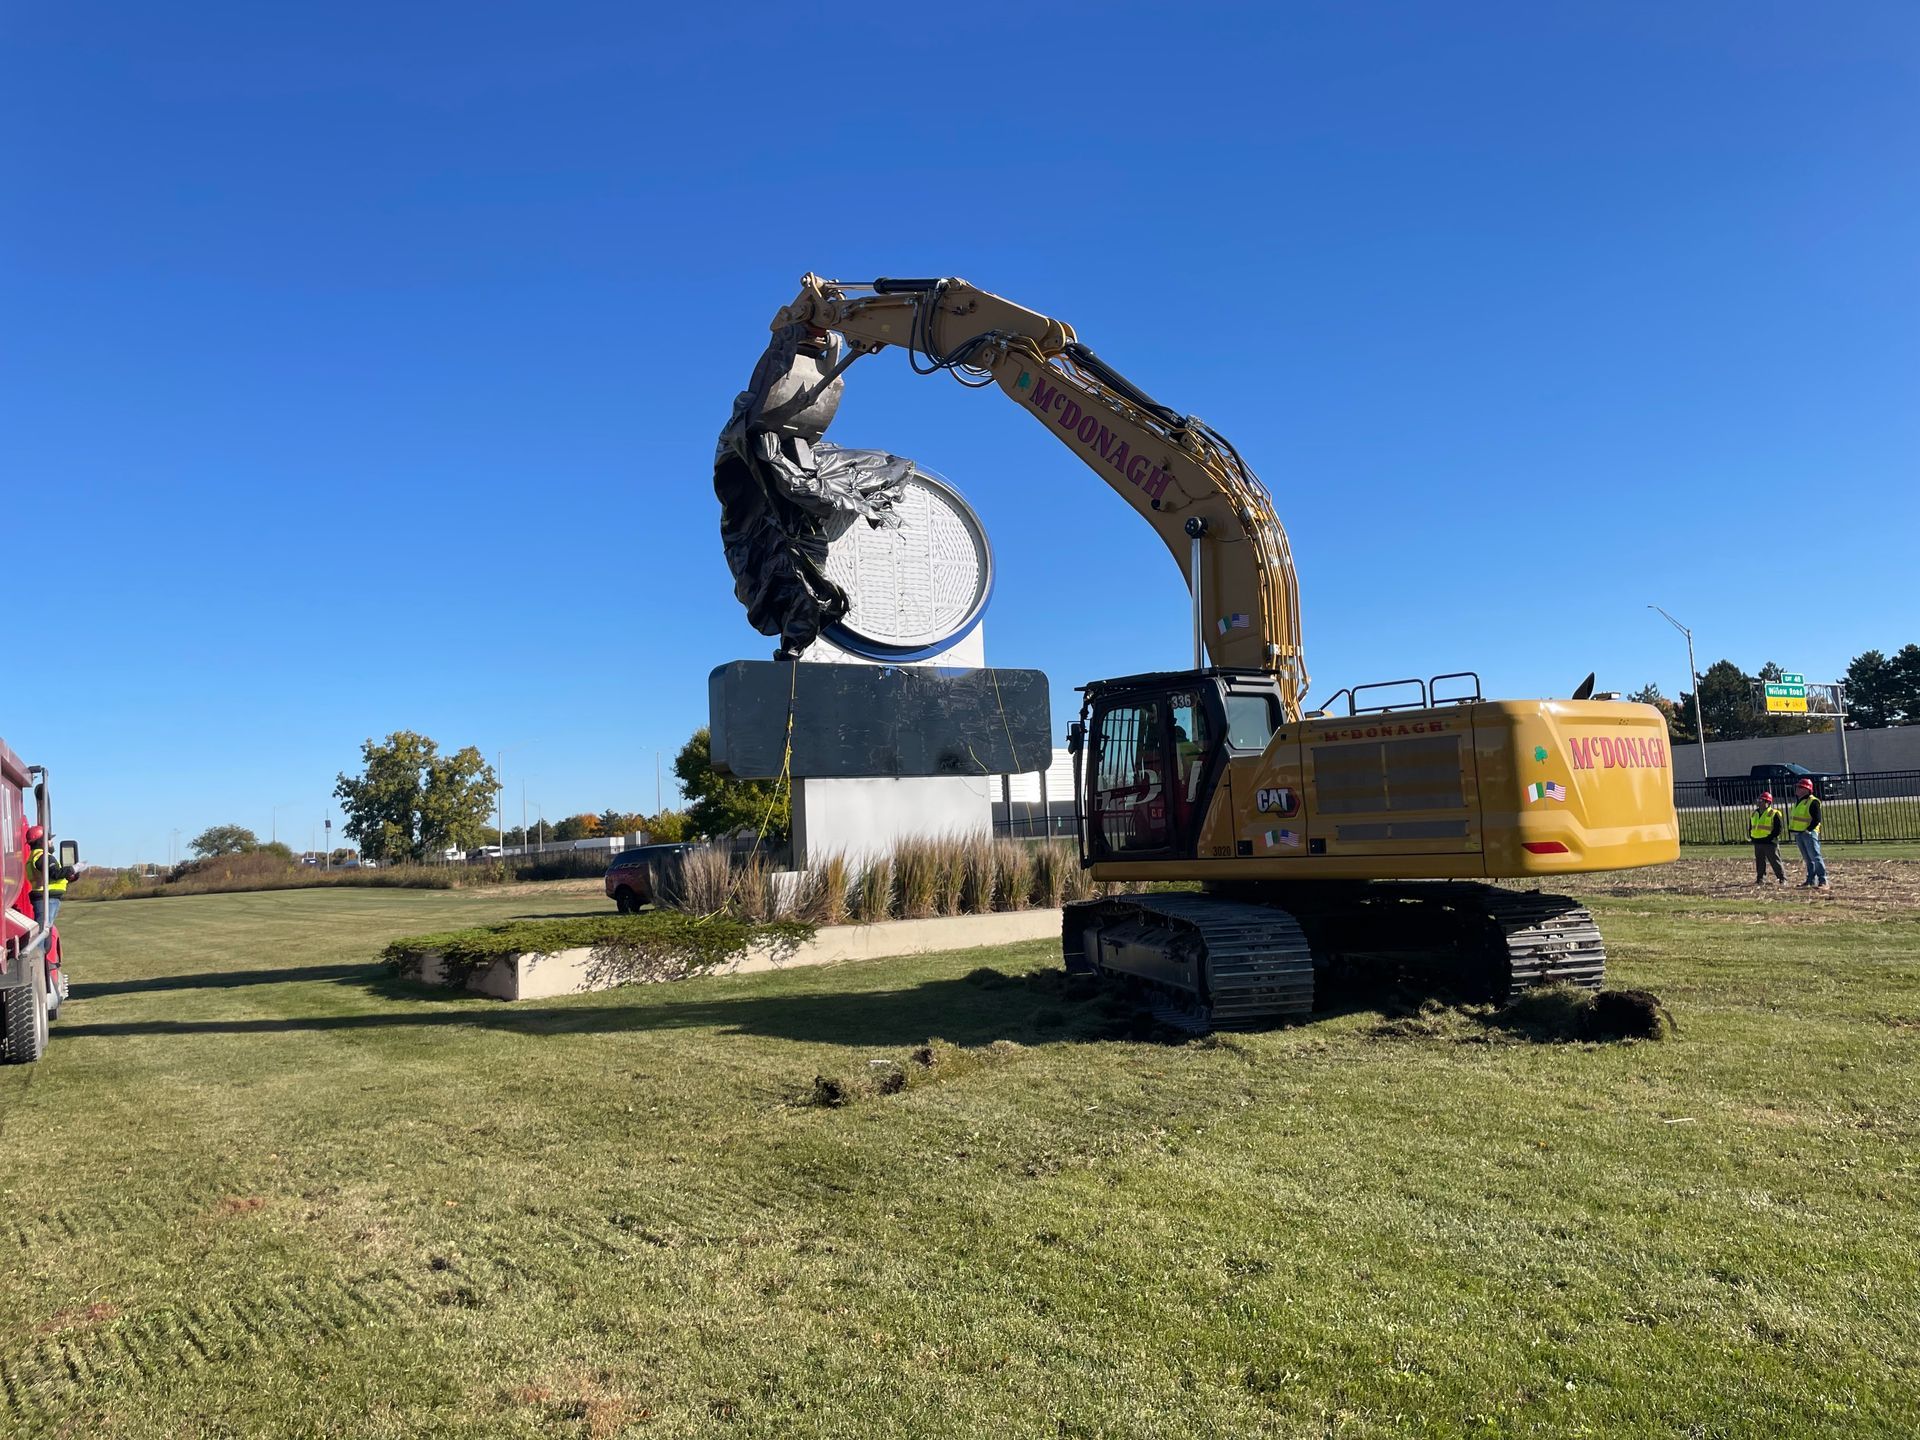 A large excavator is digging a hole in a grassy field.